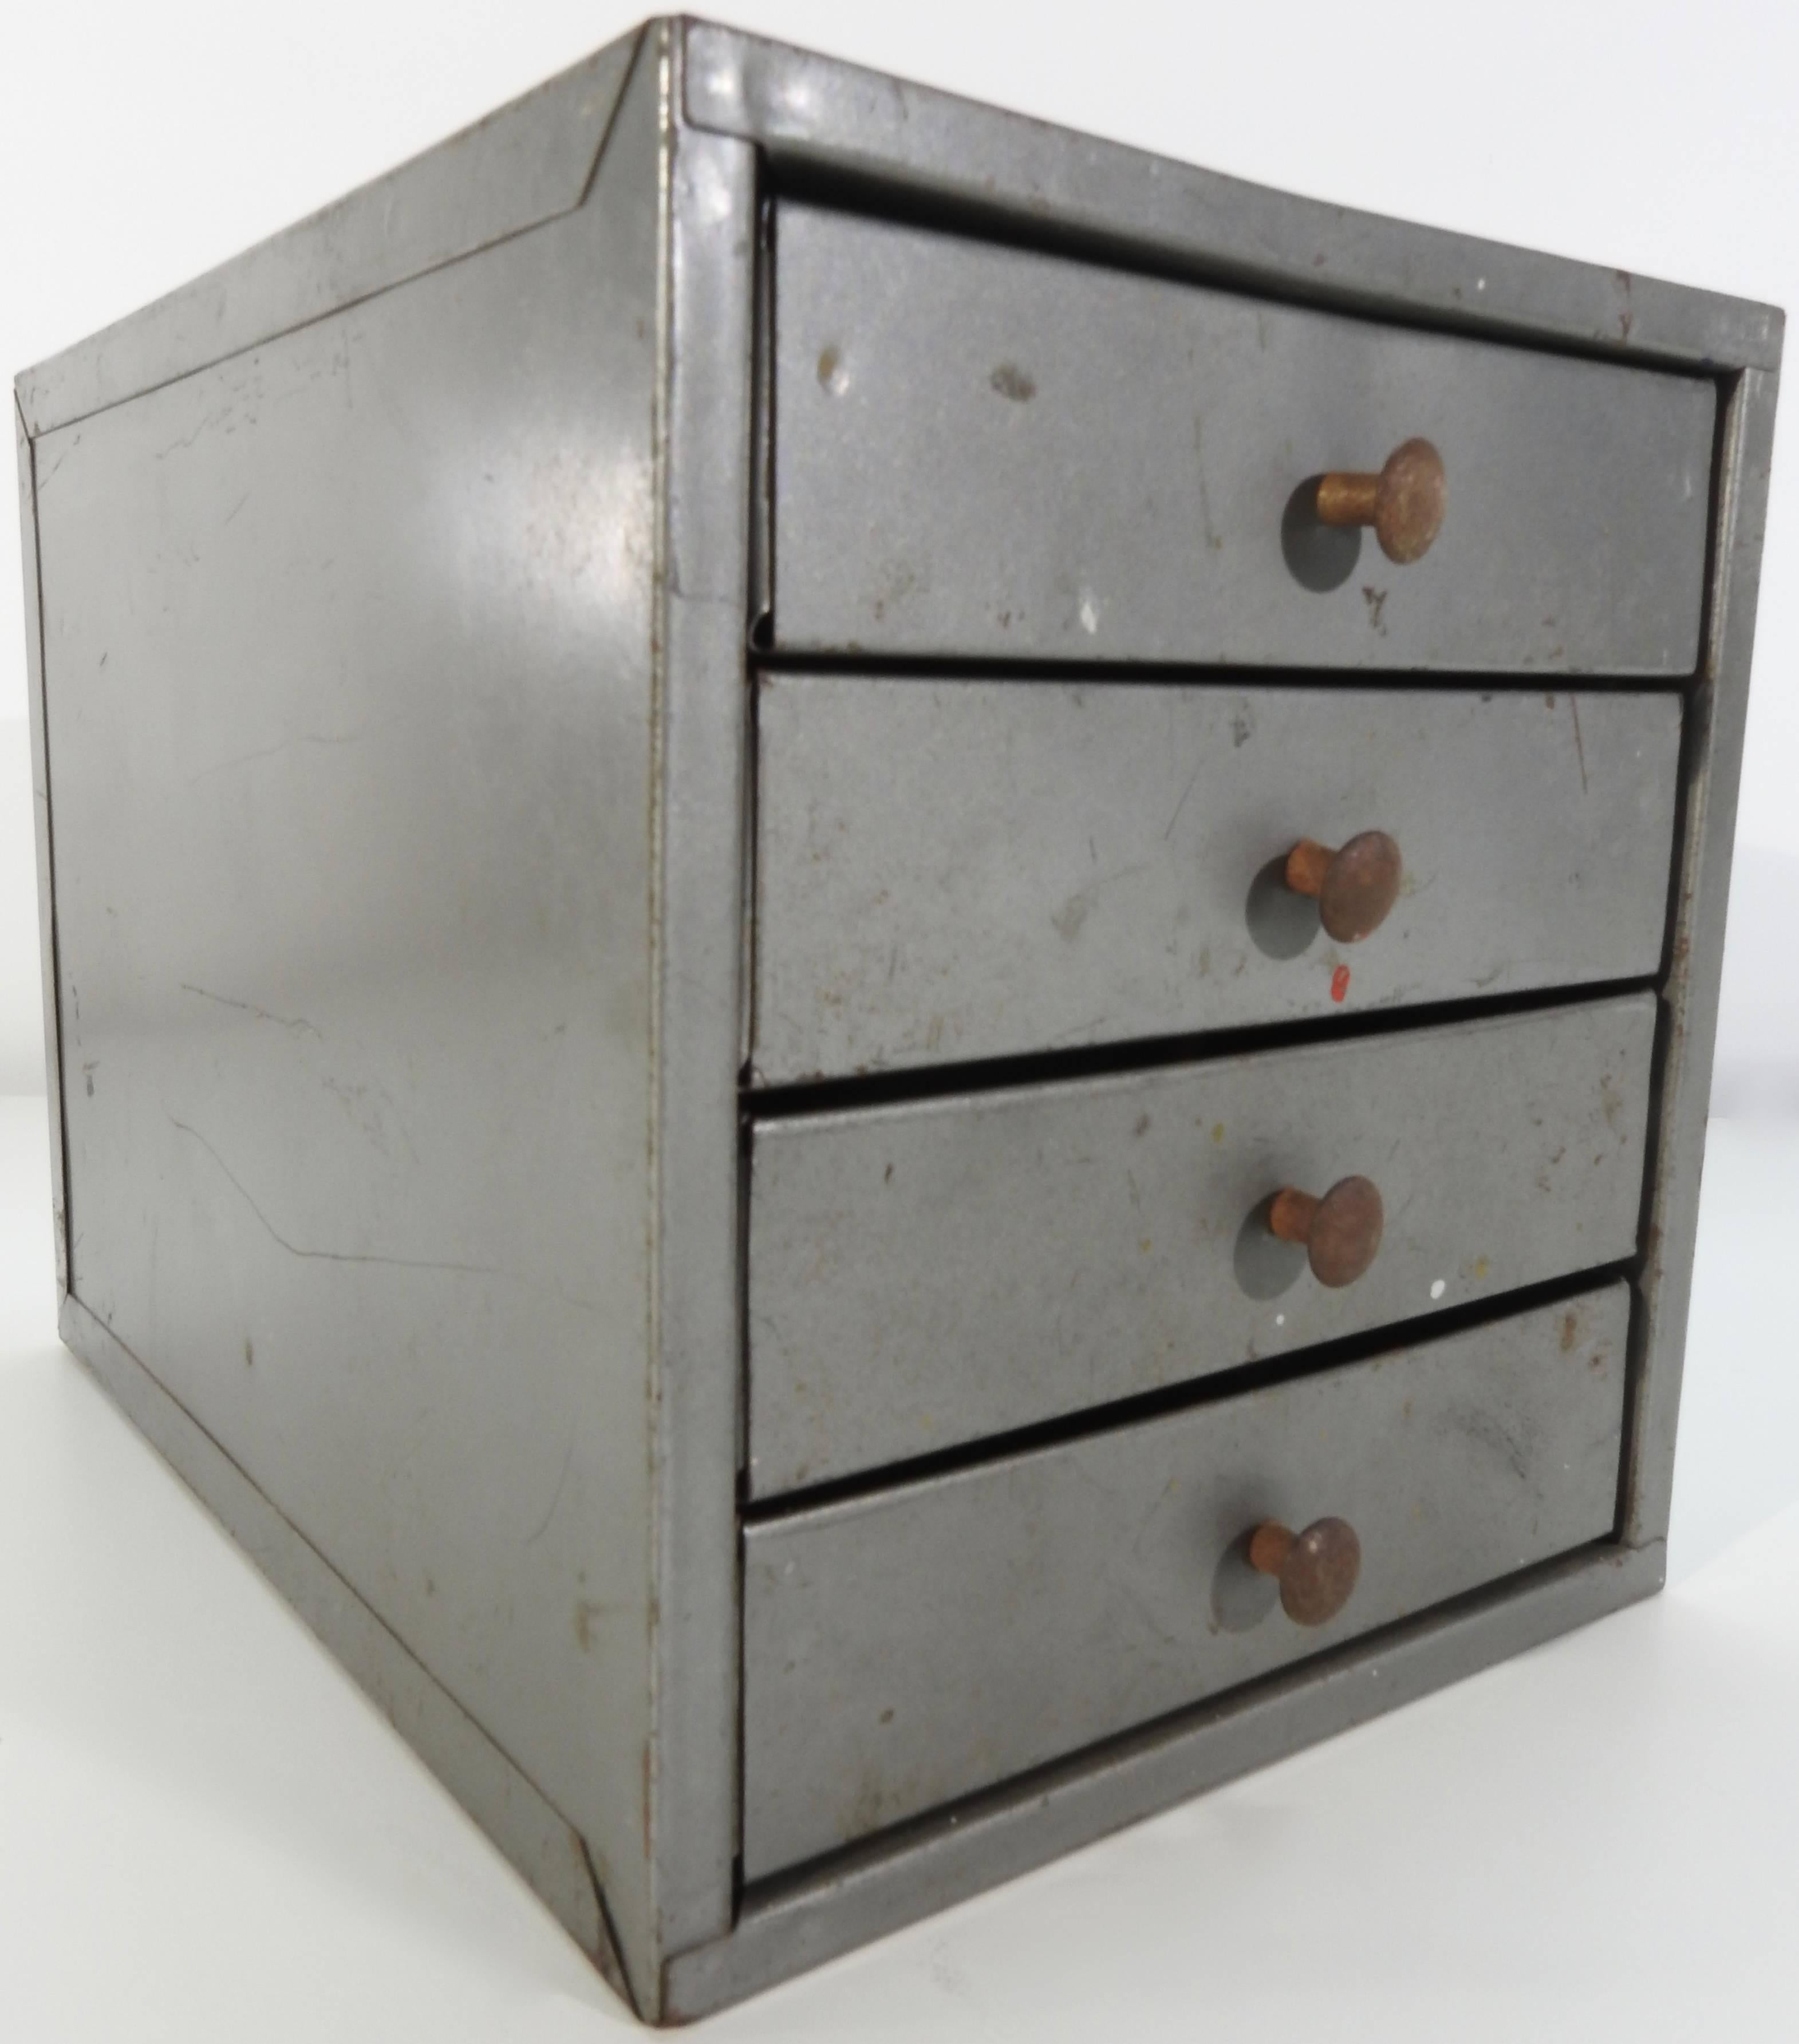 We are offering a small industrial metal box from the midcentury era. It feature four drawers with some partitions. Knobs serve to pull the drawers open. This would make for a unique desk accessory.